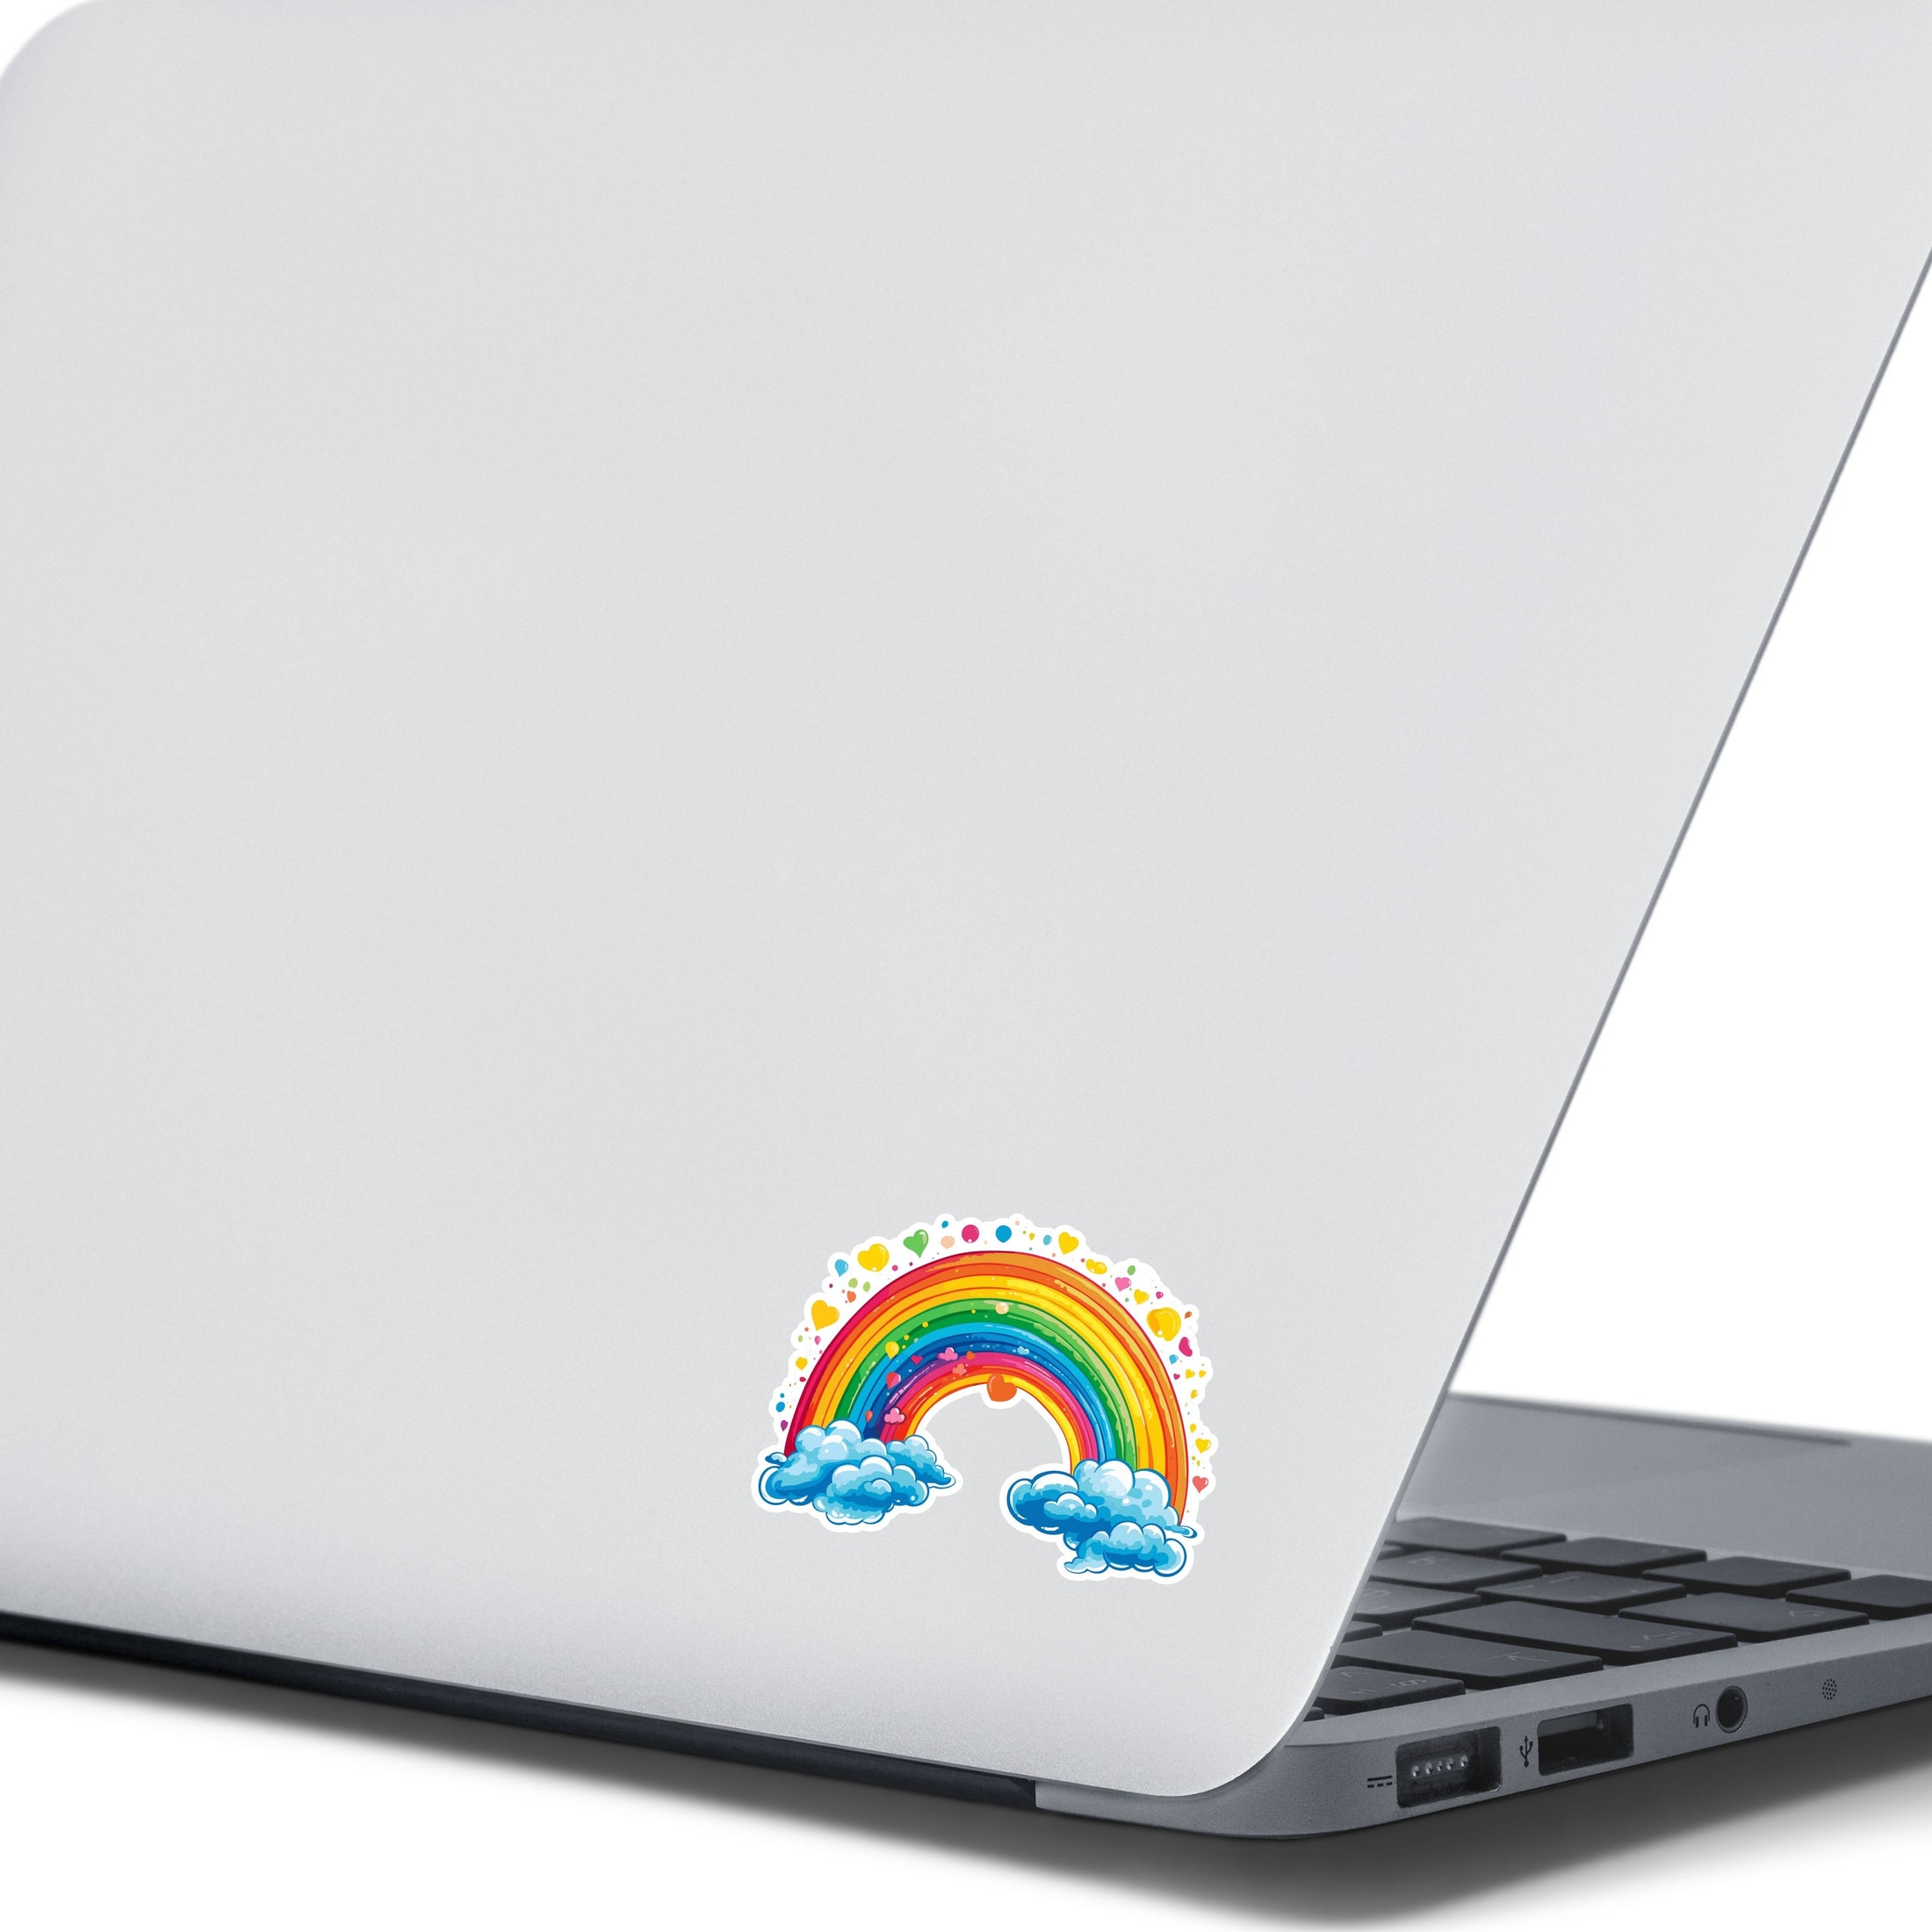 This image shows the rainbow and hearts sticker on the back of and open laptop.